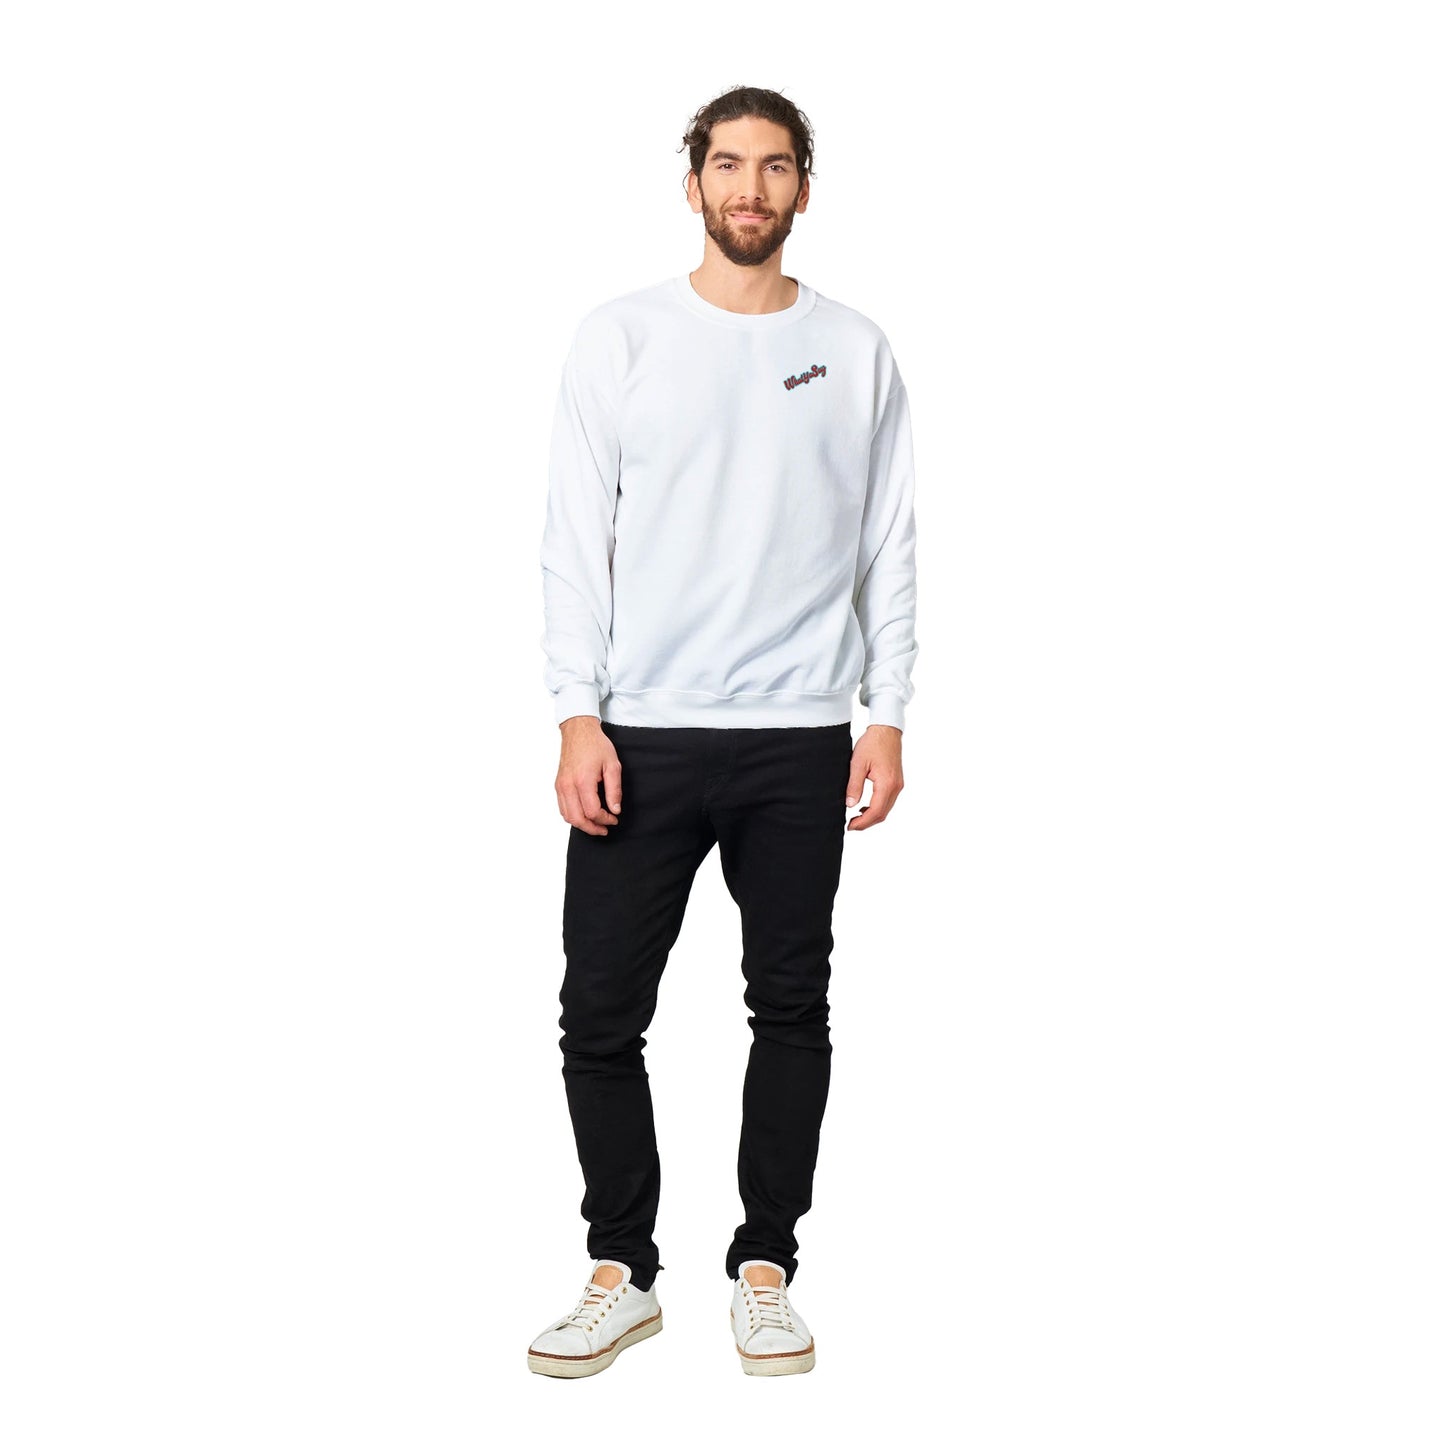 Standing short dark-haired male model wearing a white Classic Unisex Crewneck sweatshirt with original artwork and motto Don’t Judge Me Till You’ve Held my margarita on back and Whatya Say logo on front from WhatYa Say Apparel front view.